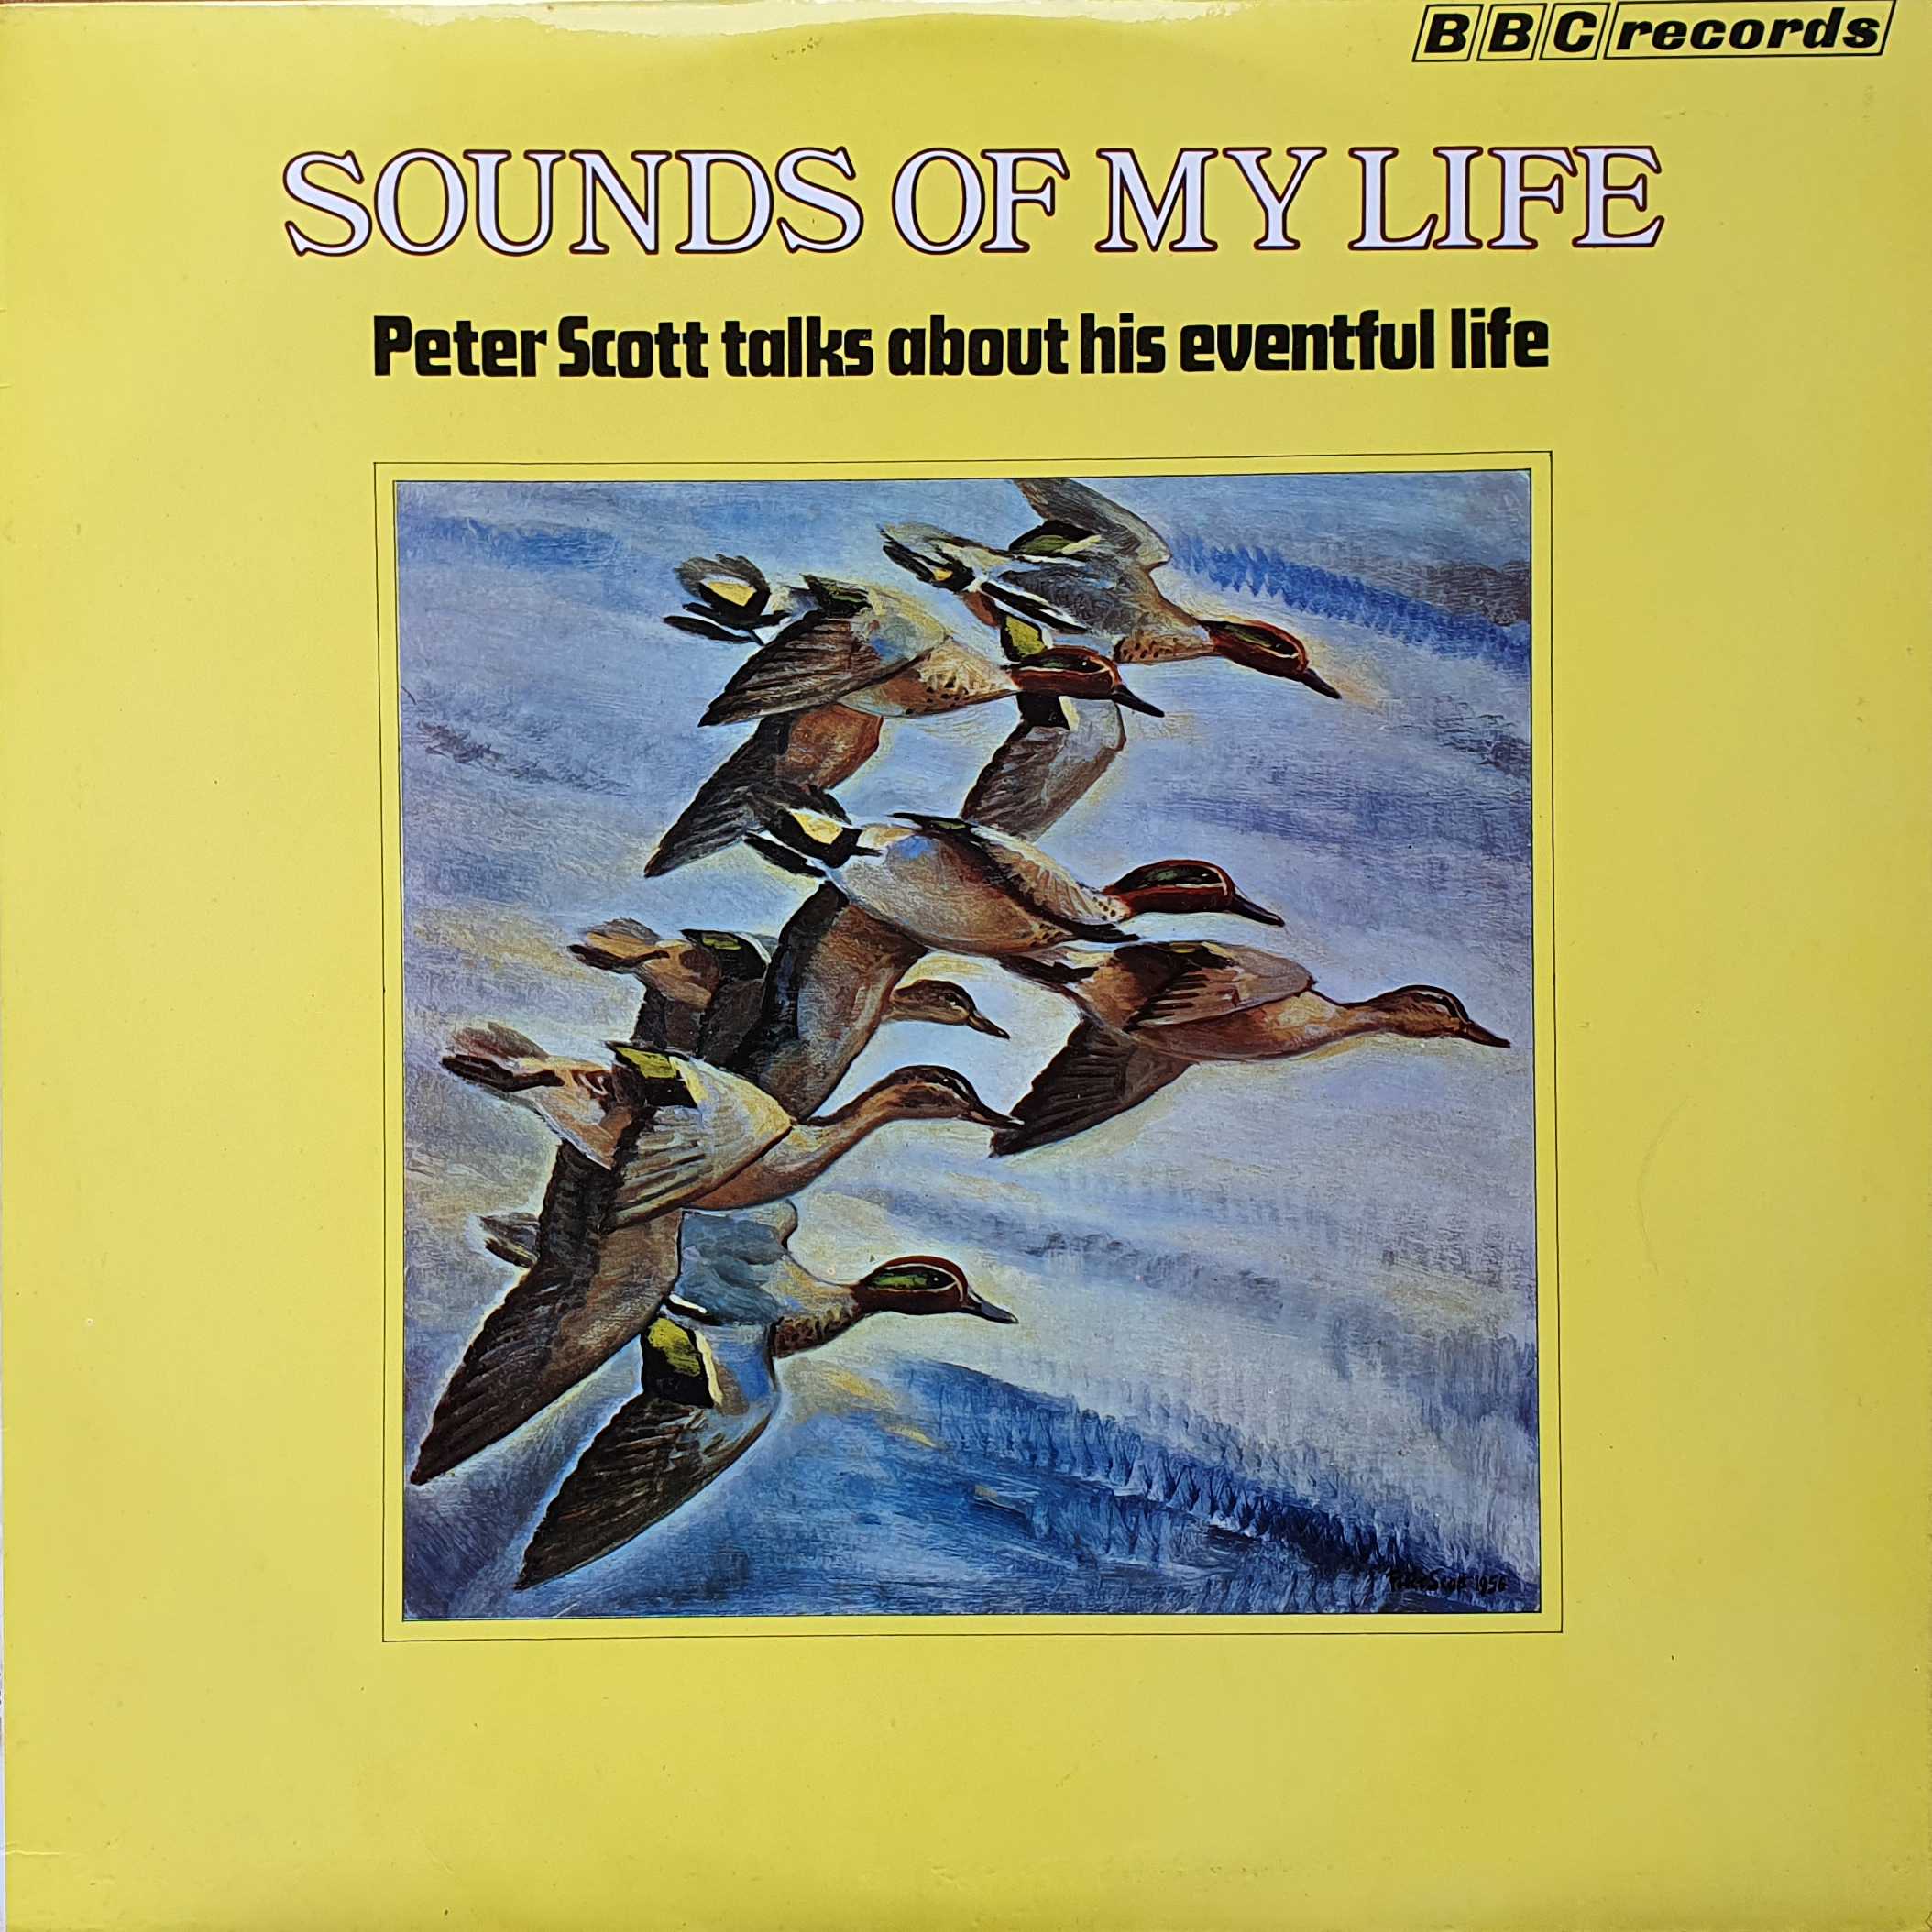 Picture of REC 59 Sounds of my life by artist Peter Scott from the BBC albums - Records and Tapes library